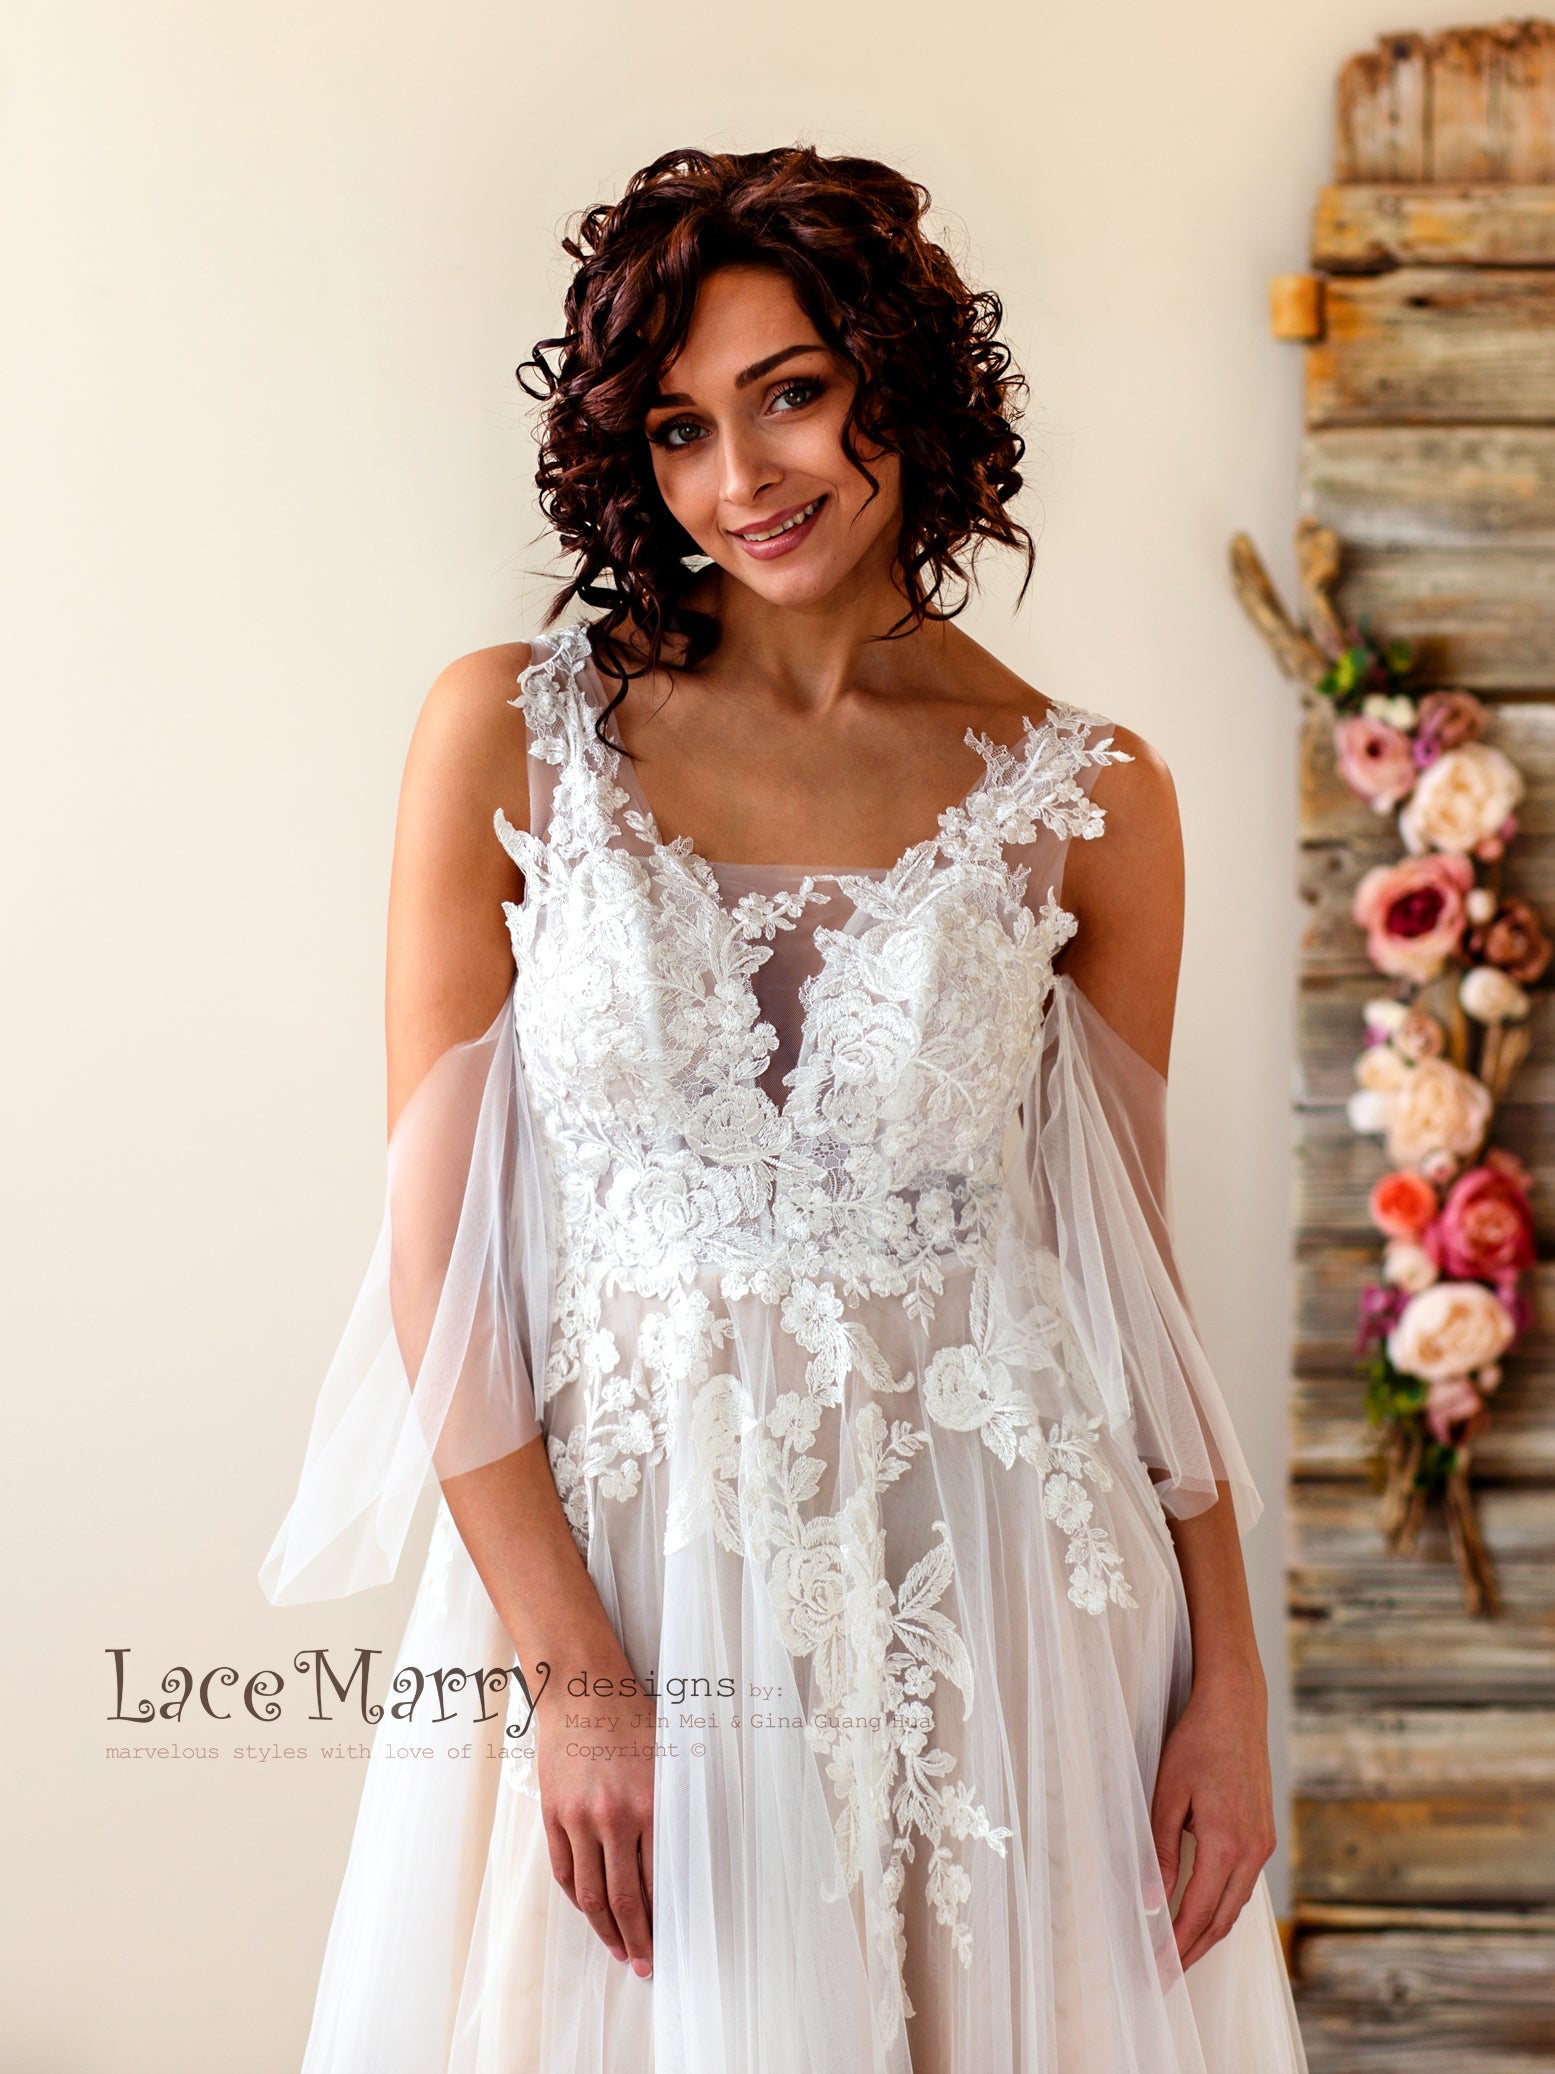 Boho Wedding Dress: Sweetheart Neck Appliques Beaded Lace Bridal Gown with  Bra